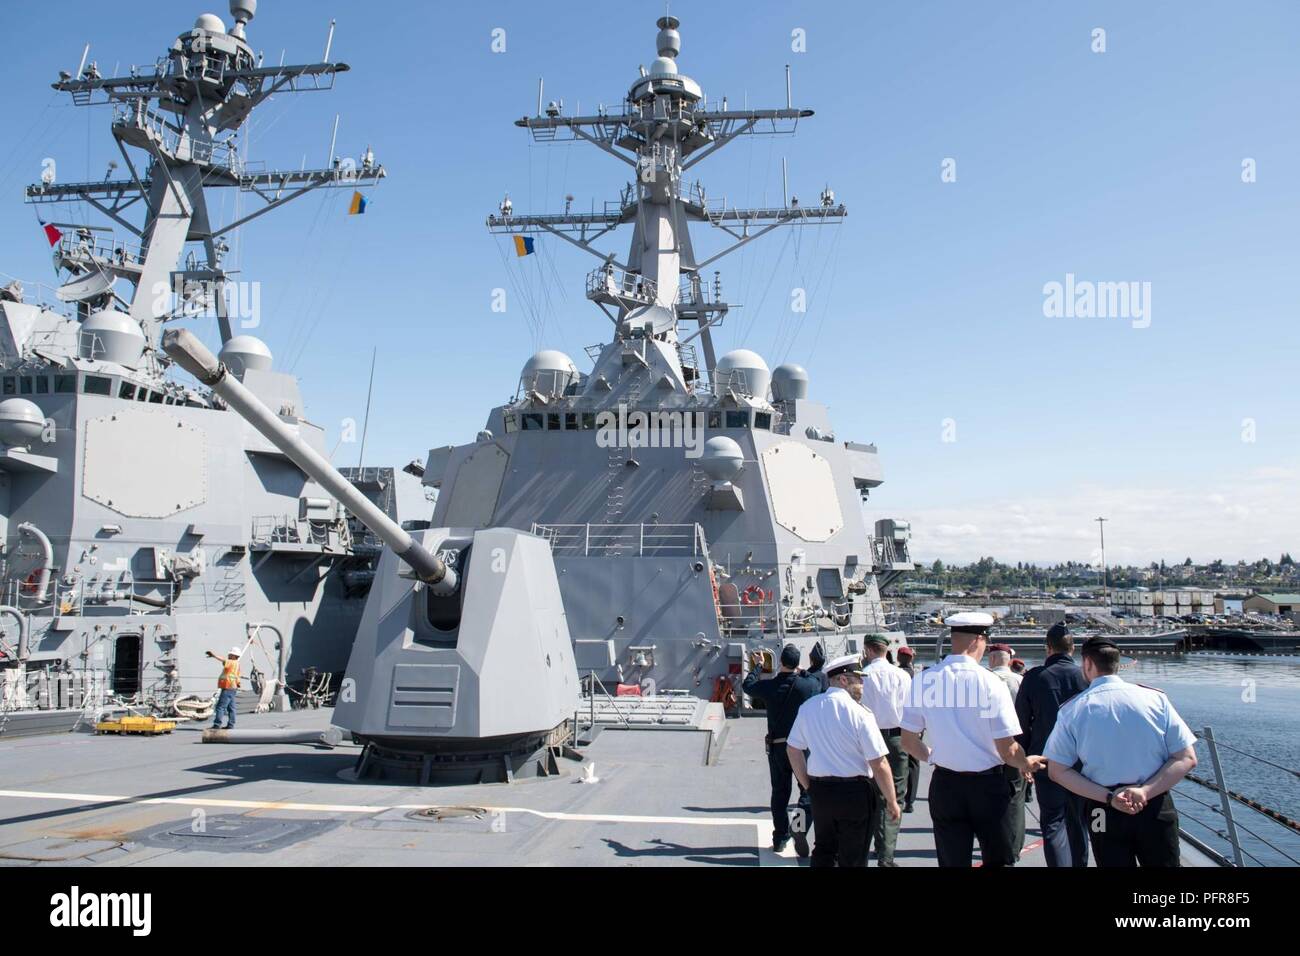 Everett, Wash. (May 21, 2018) Officers assigned to the Arleigh Burke-class guided-missile destroyer USS Gridley (DDG 101) give visiting German officers enrolled in the International General/Admiral Staff Officer Course (IGASOC) a tour of their ship. The tour is part of a visit by IGASOC students to Naval Station Everett. Stock Photo